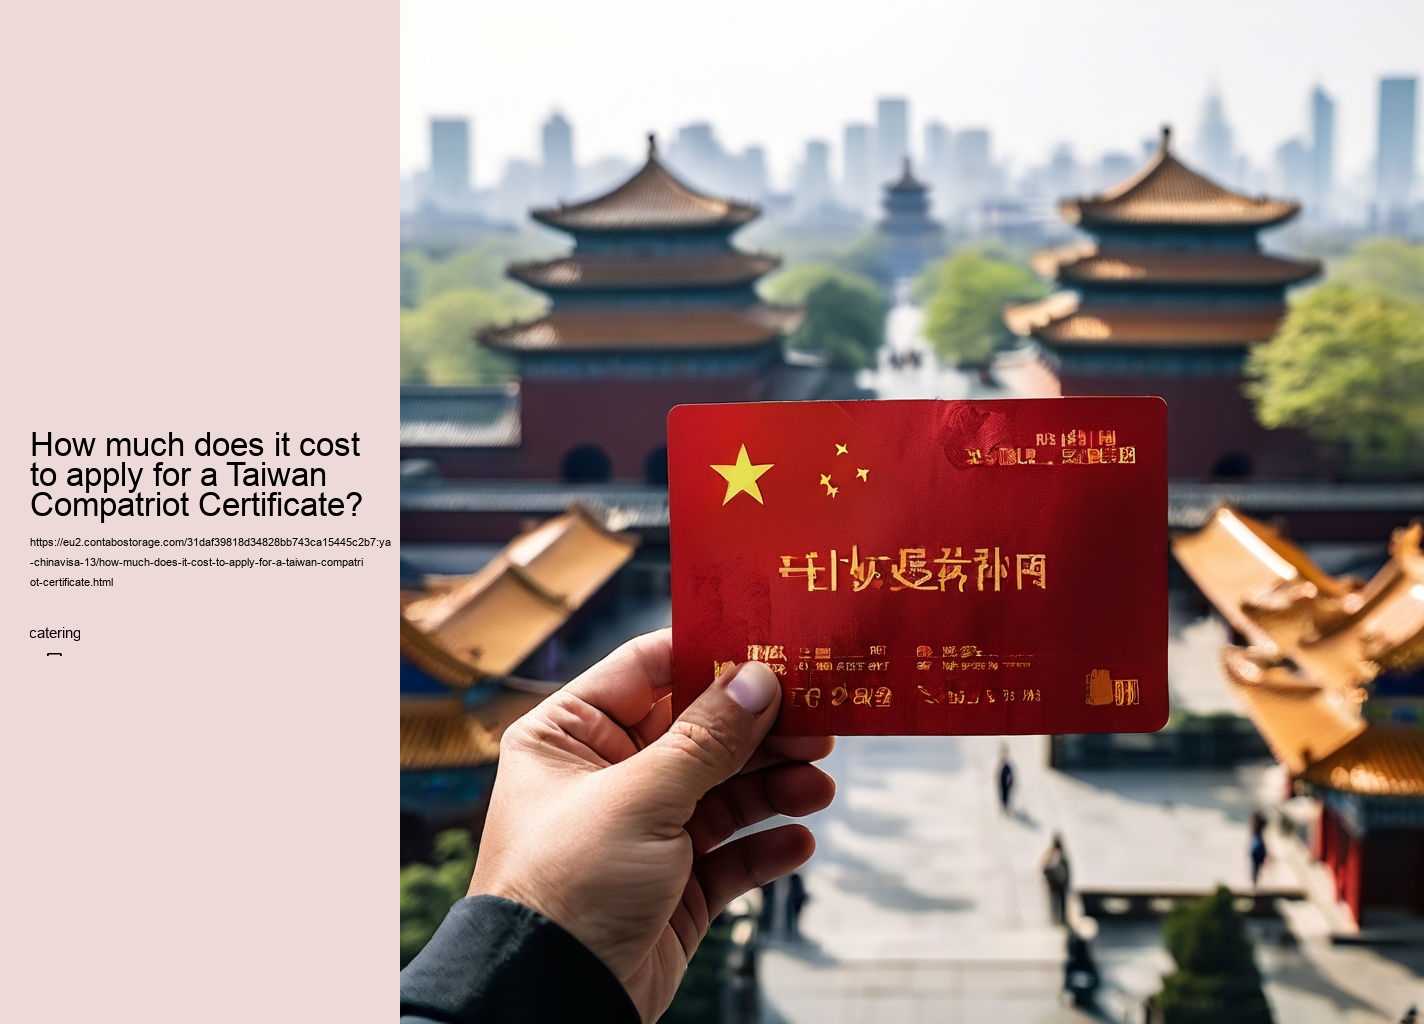 How much does it cost to apply for a Taiwan Compatriot Certificate?